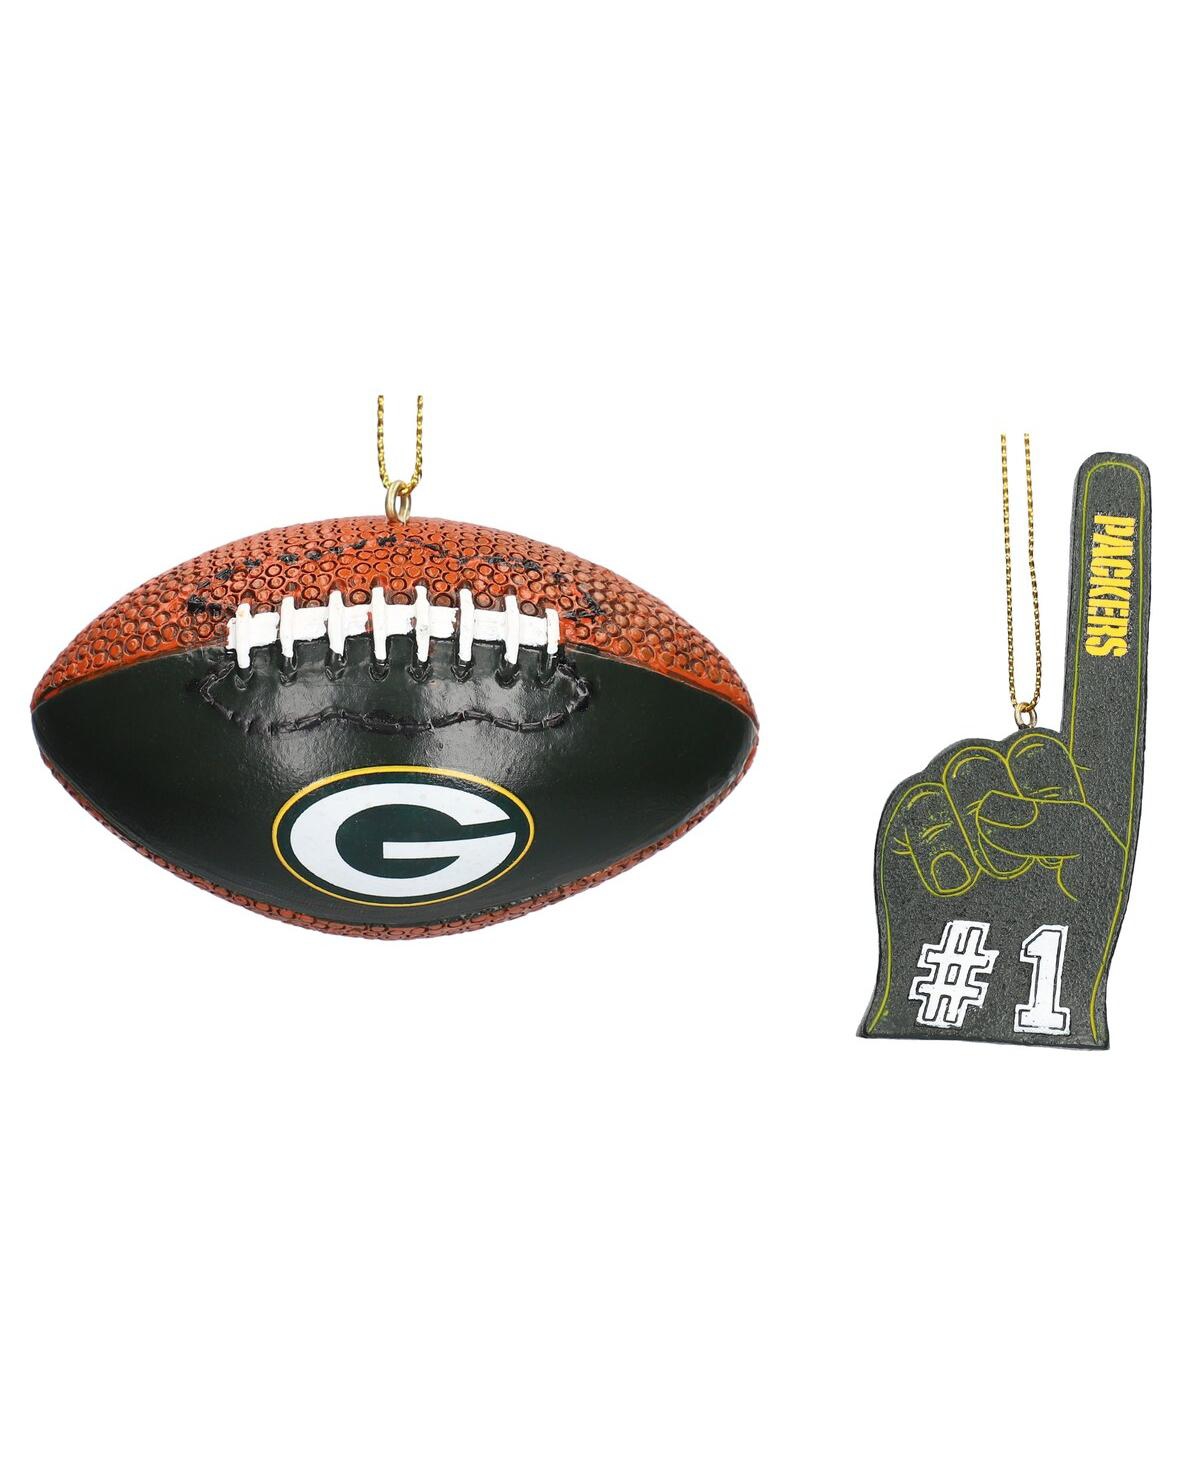 The Memory Company Green Bay Packers Football and Foam Finger Ornament Two-Pack - Multi